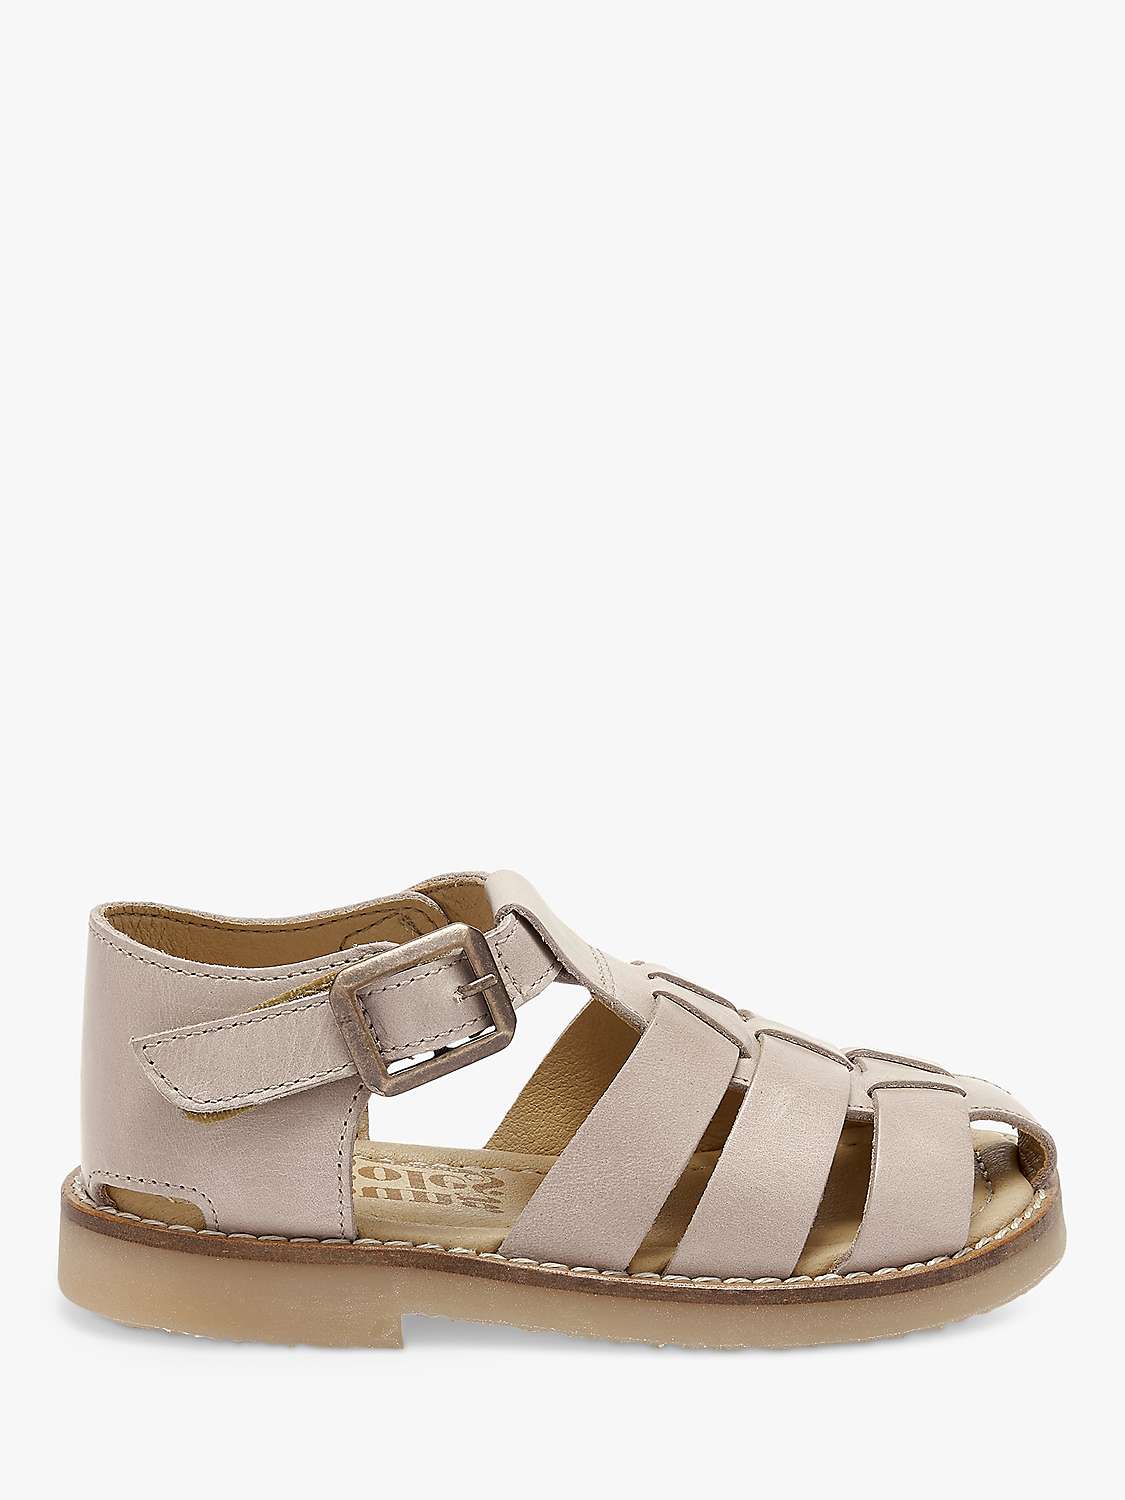 Buy Young Soles Kids' Leather Noah Fisherman Sandals Online at johnlewis.com